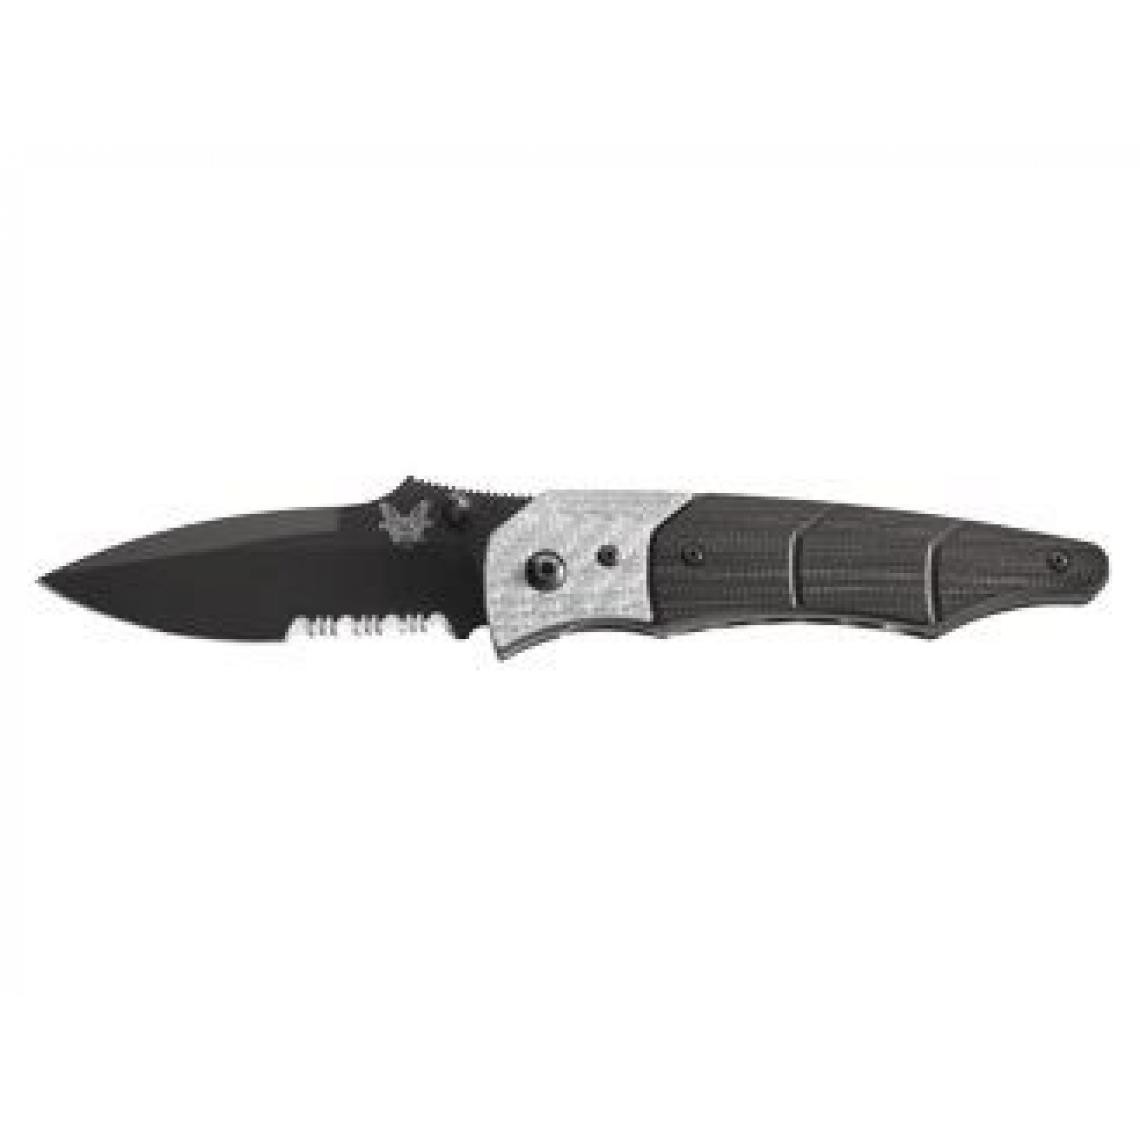 Divers Marques - Benchmade RESISTOR 426SBK BLACK COMBO - Outils de coupe